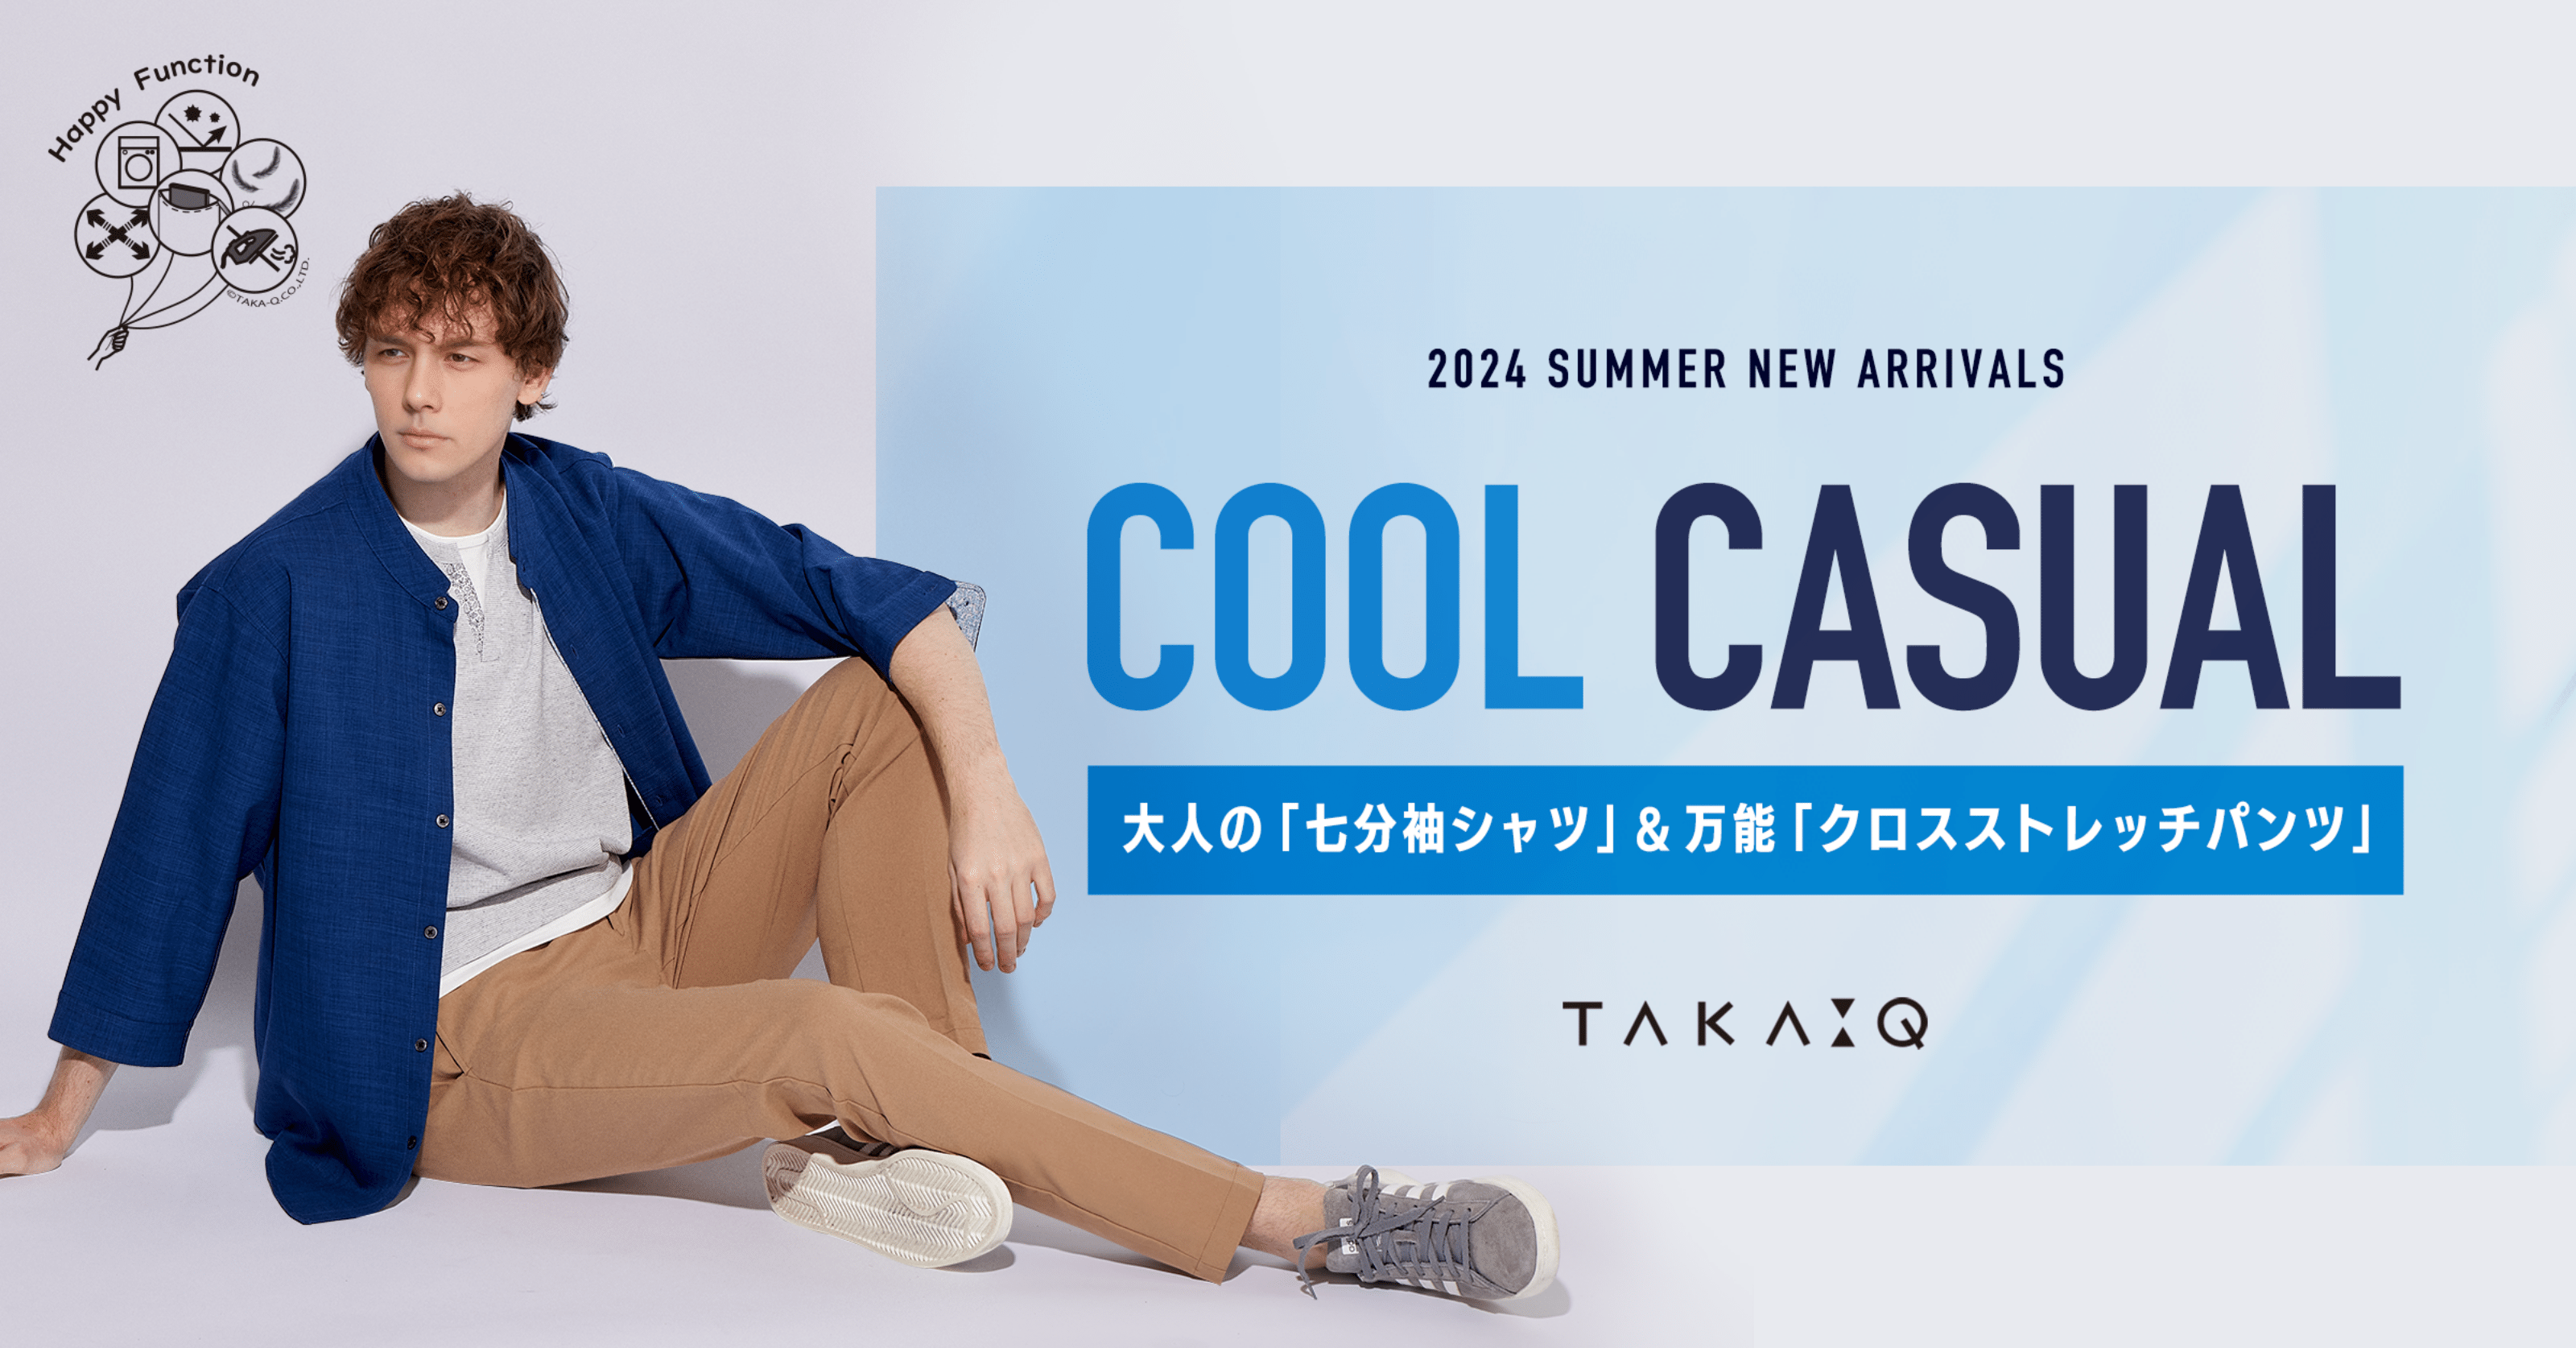 2024 SUMMER NEW ARRIVALS COOL CASUAL